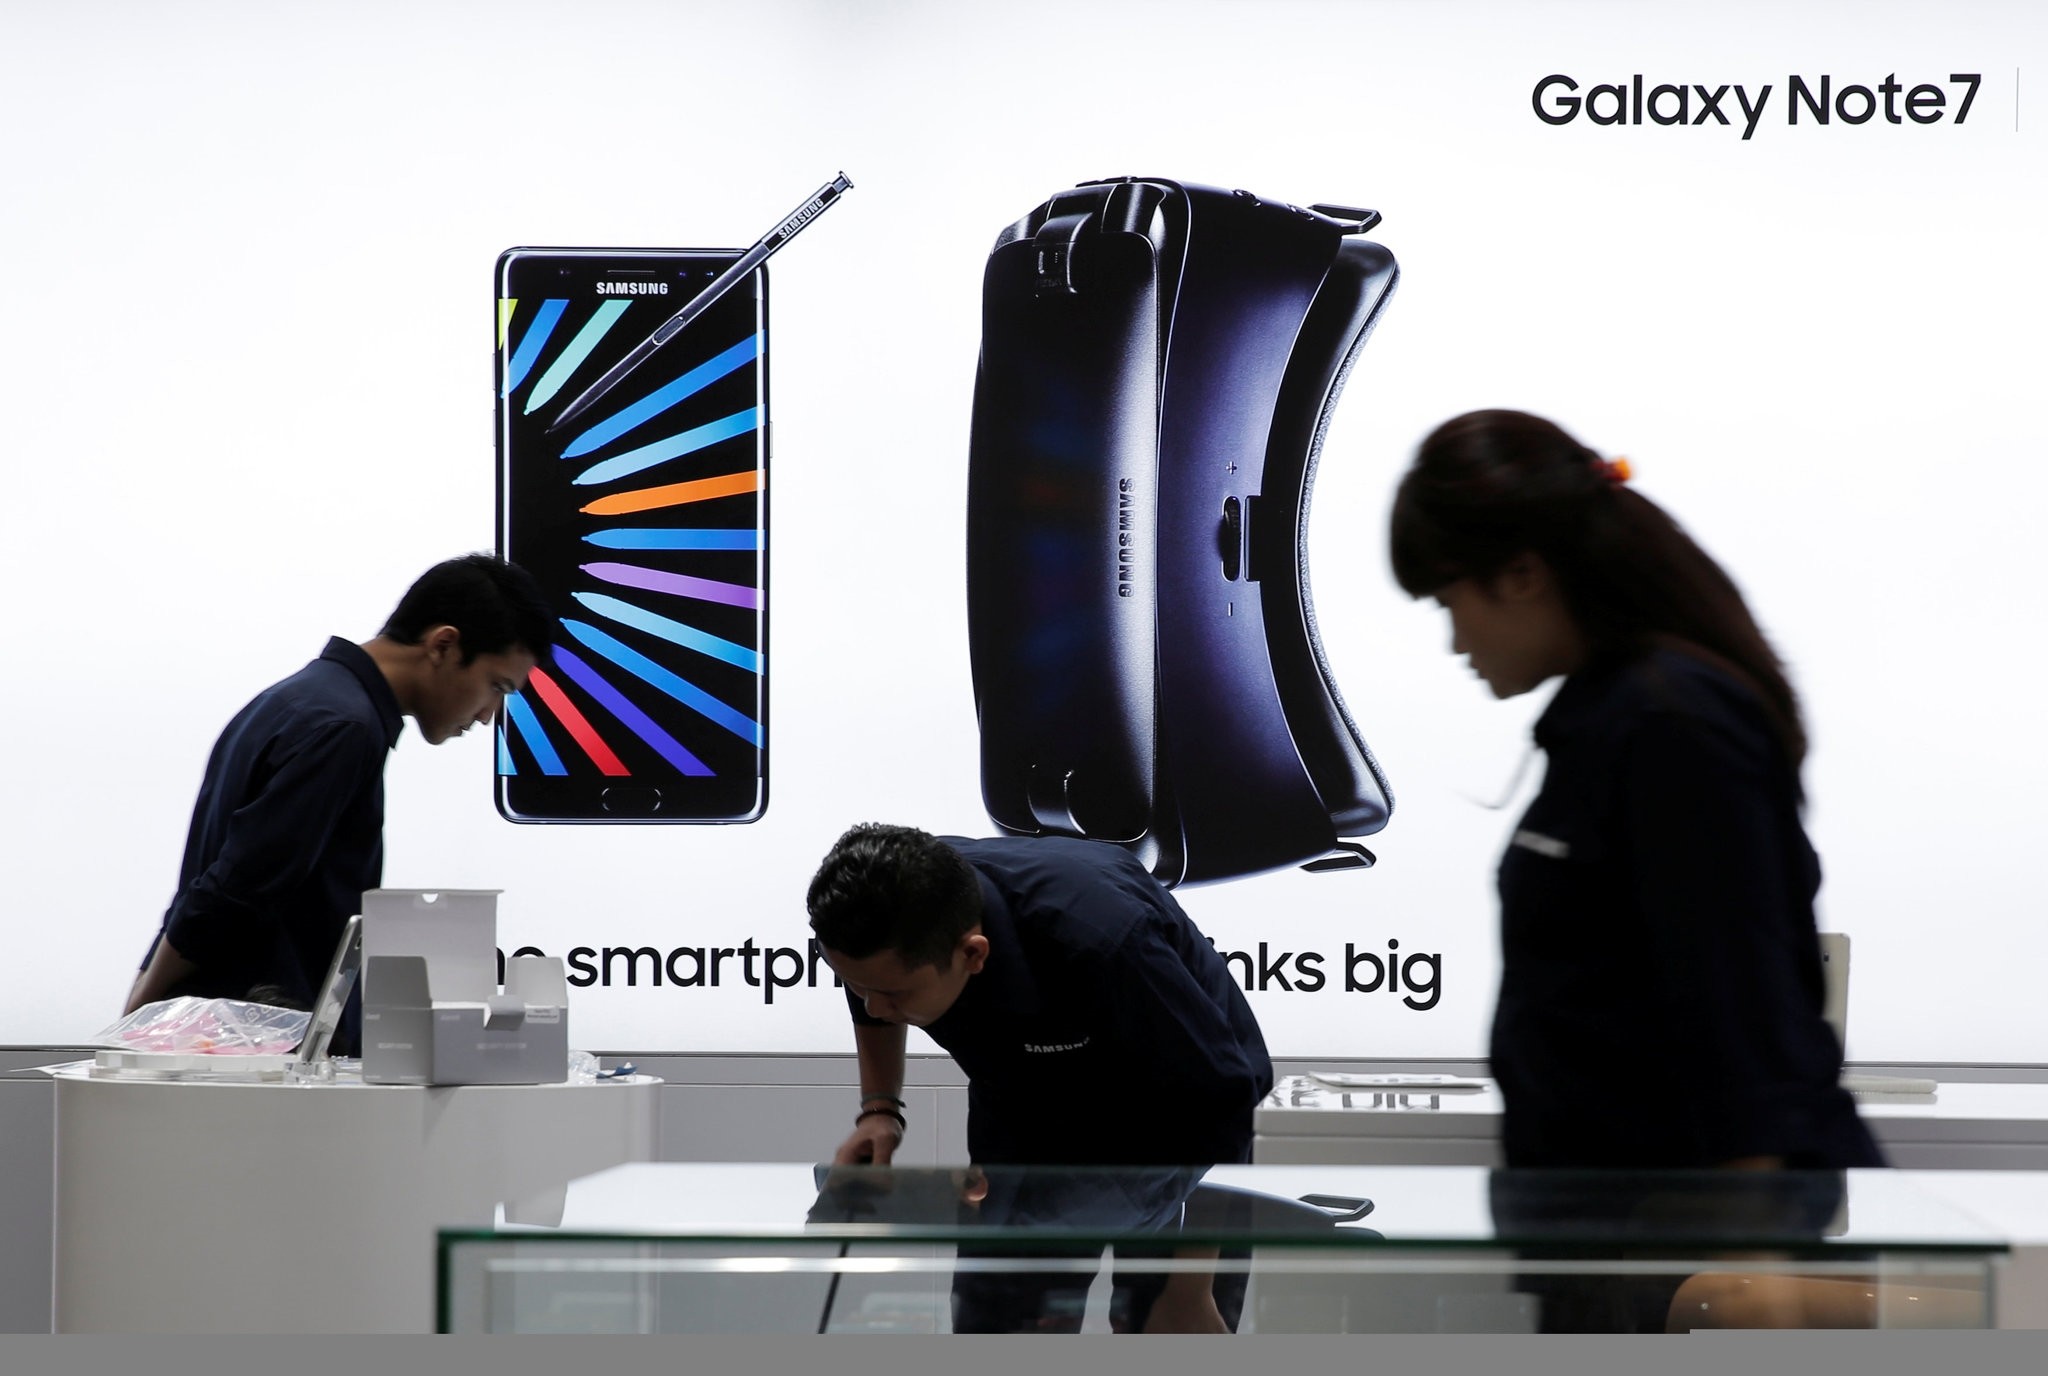 Sales promotion staff stand in front of a Galaxy Note 7 advertisement at a Samsung store in Jakarta, Indonesia.